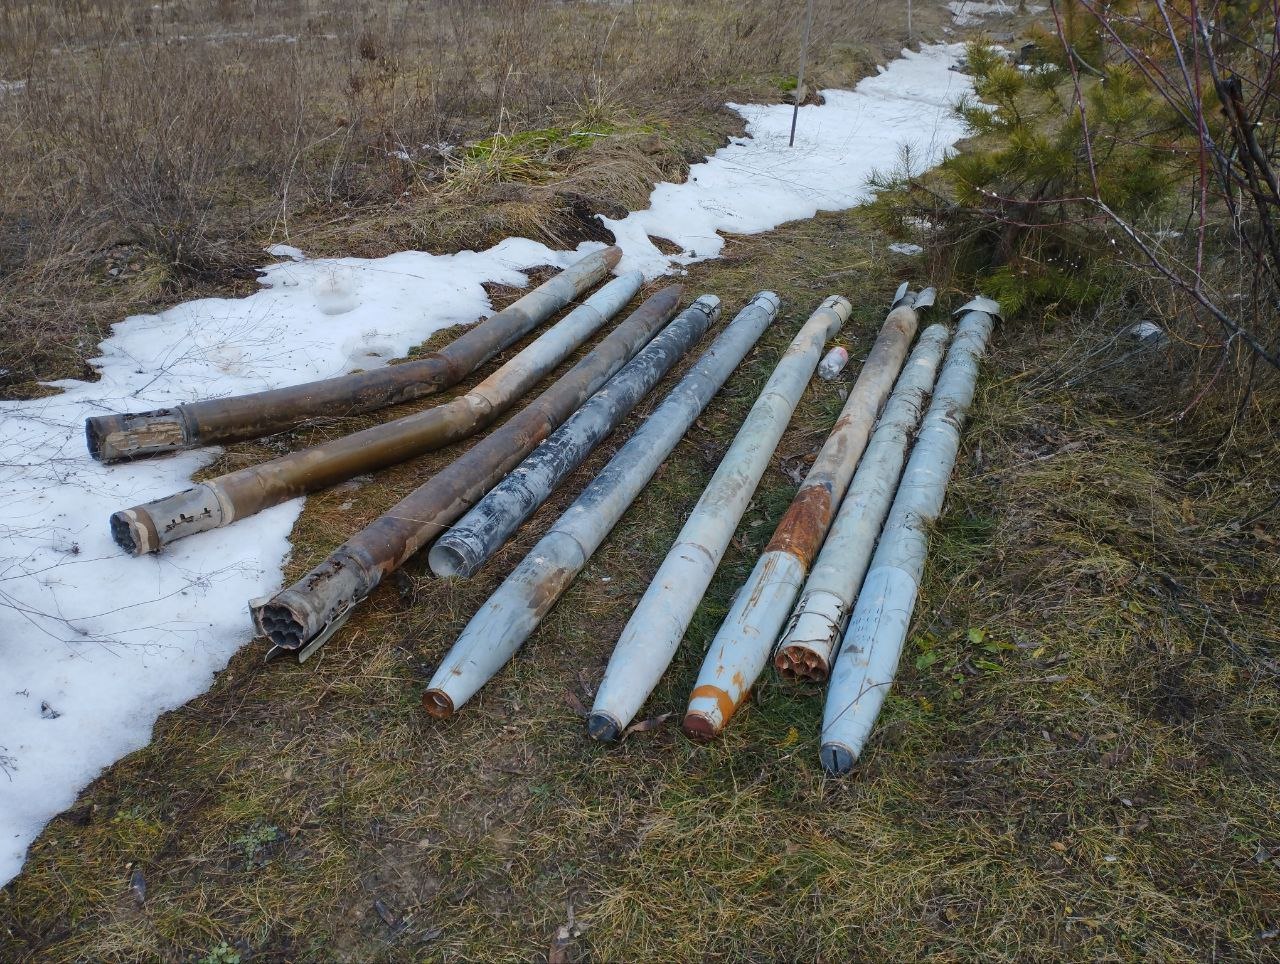 In December, Ukraine neutralized over 6,000 mines and projectiles